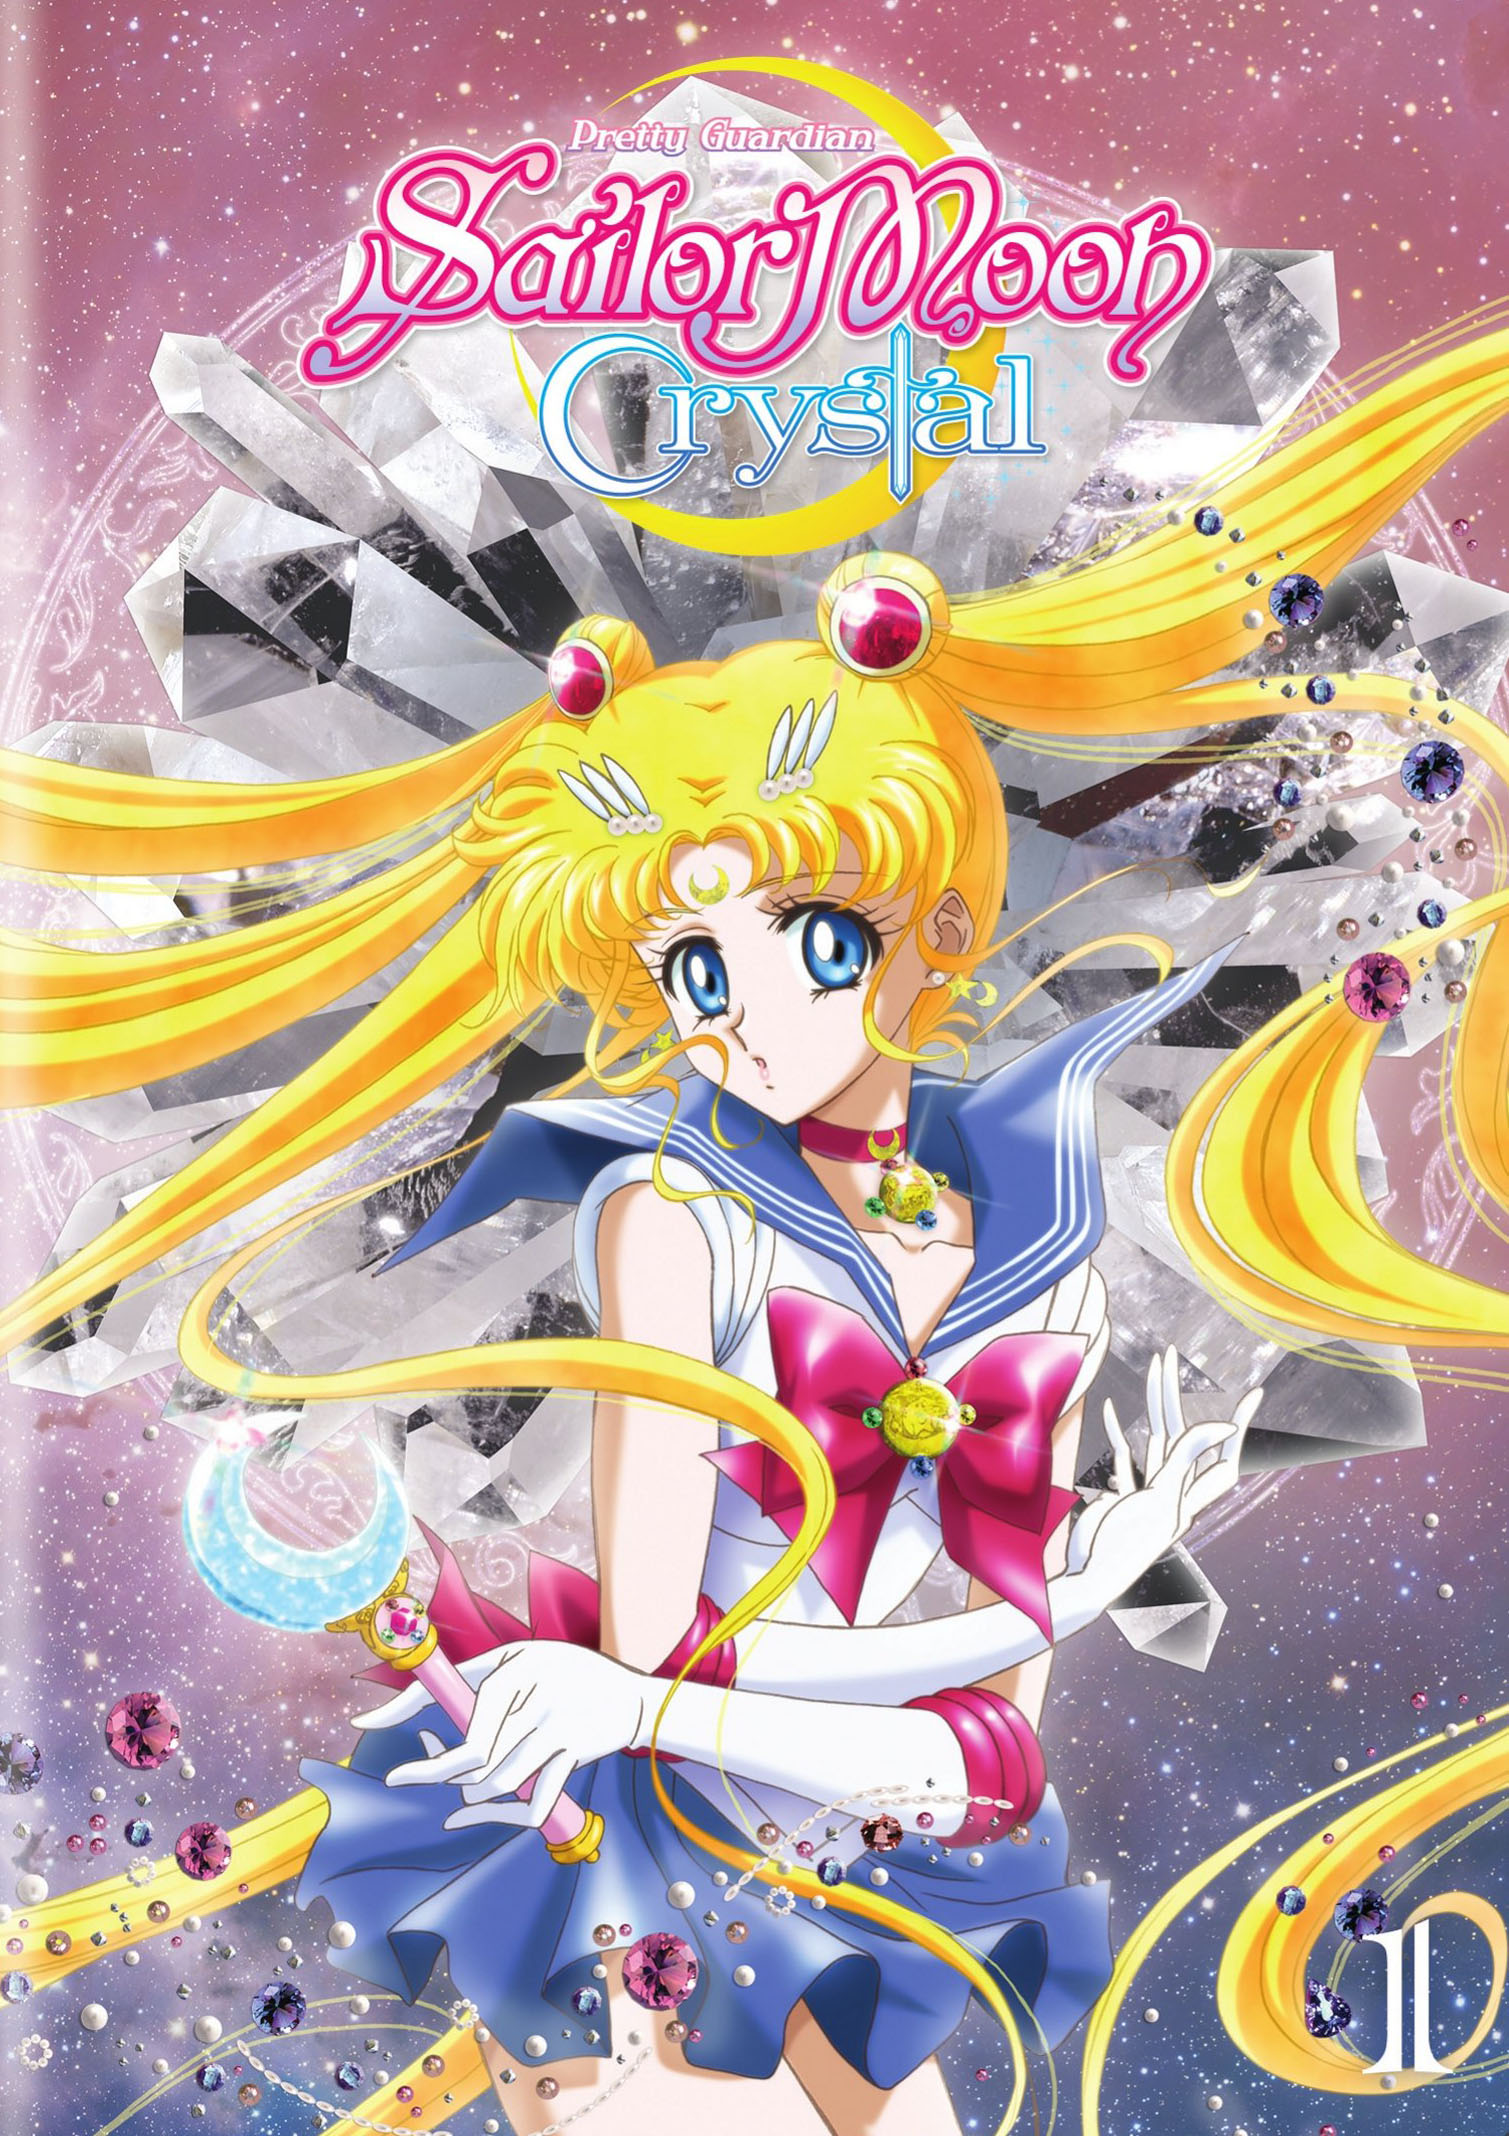 100+] Sailor Moon Crystal Pictures